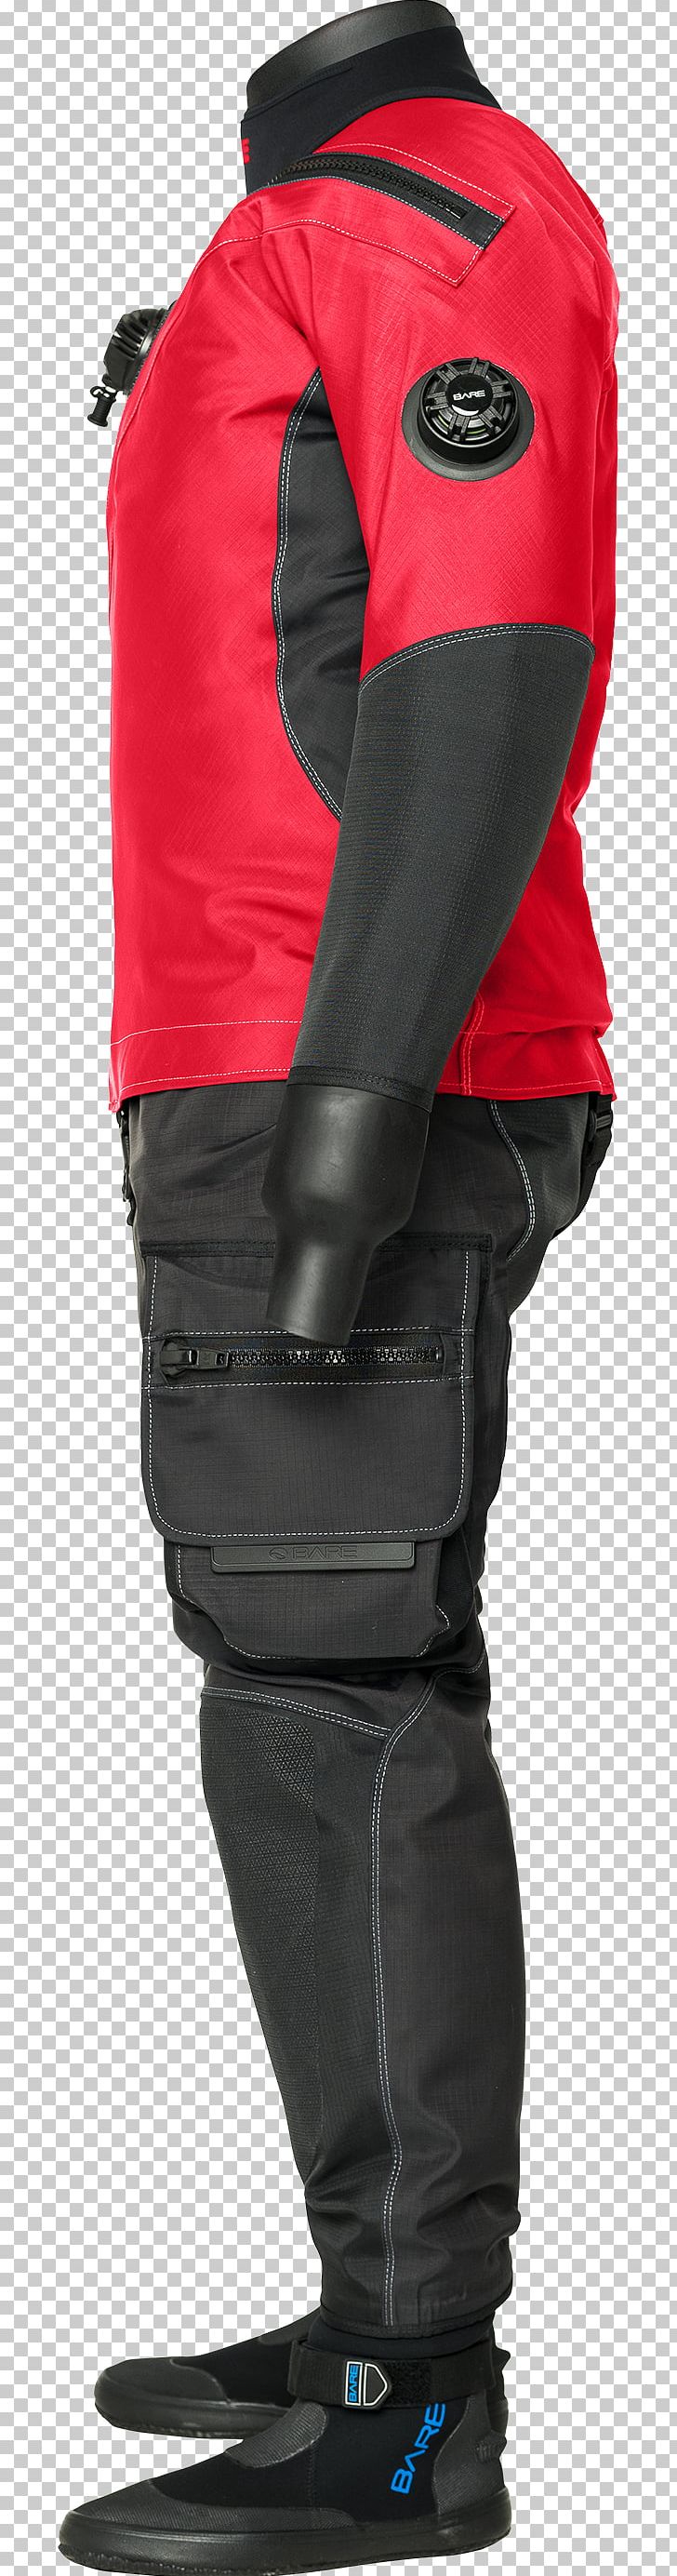 Dry Suit Underwater Diving Technical Diving Diving Equipment Space Suit PNG, Clipart, Boilersuit, British Subaqua Club, Cave Diving, Cordura, Costume Free PNG Download